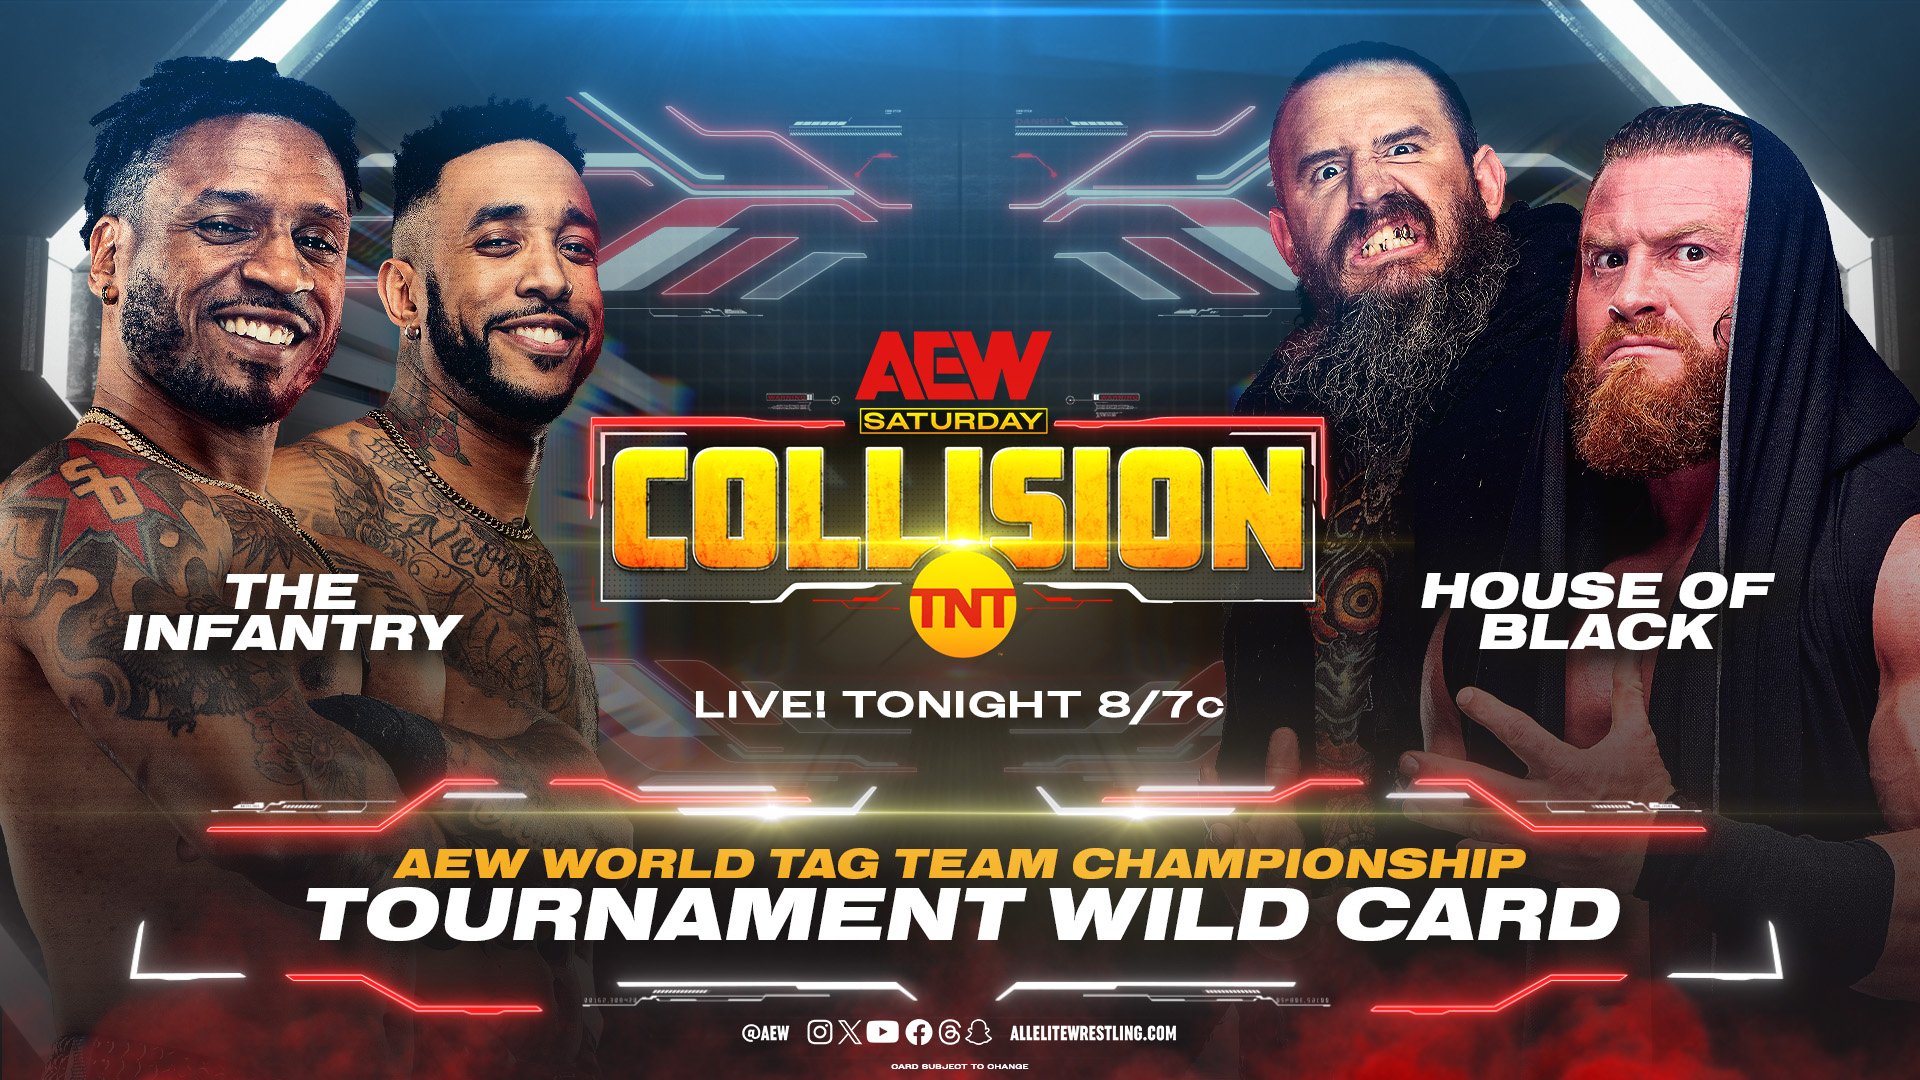 An AEW Collision match graphic featuring The Infantry vs. The House of Black.